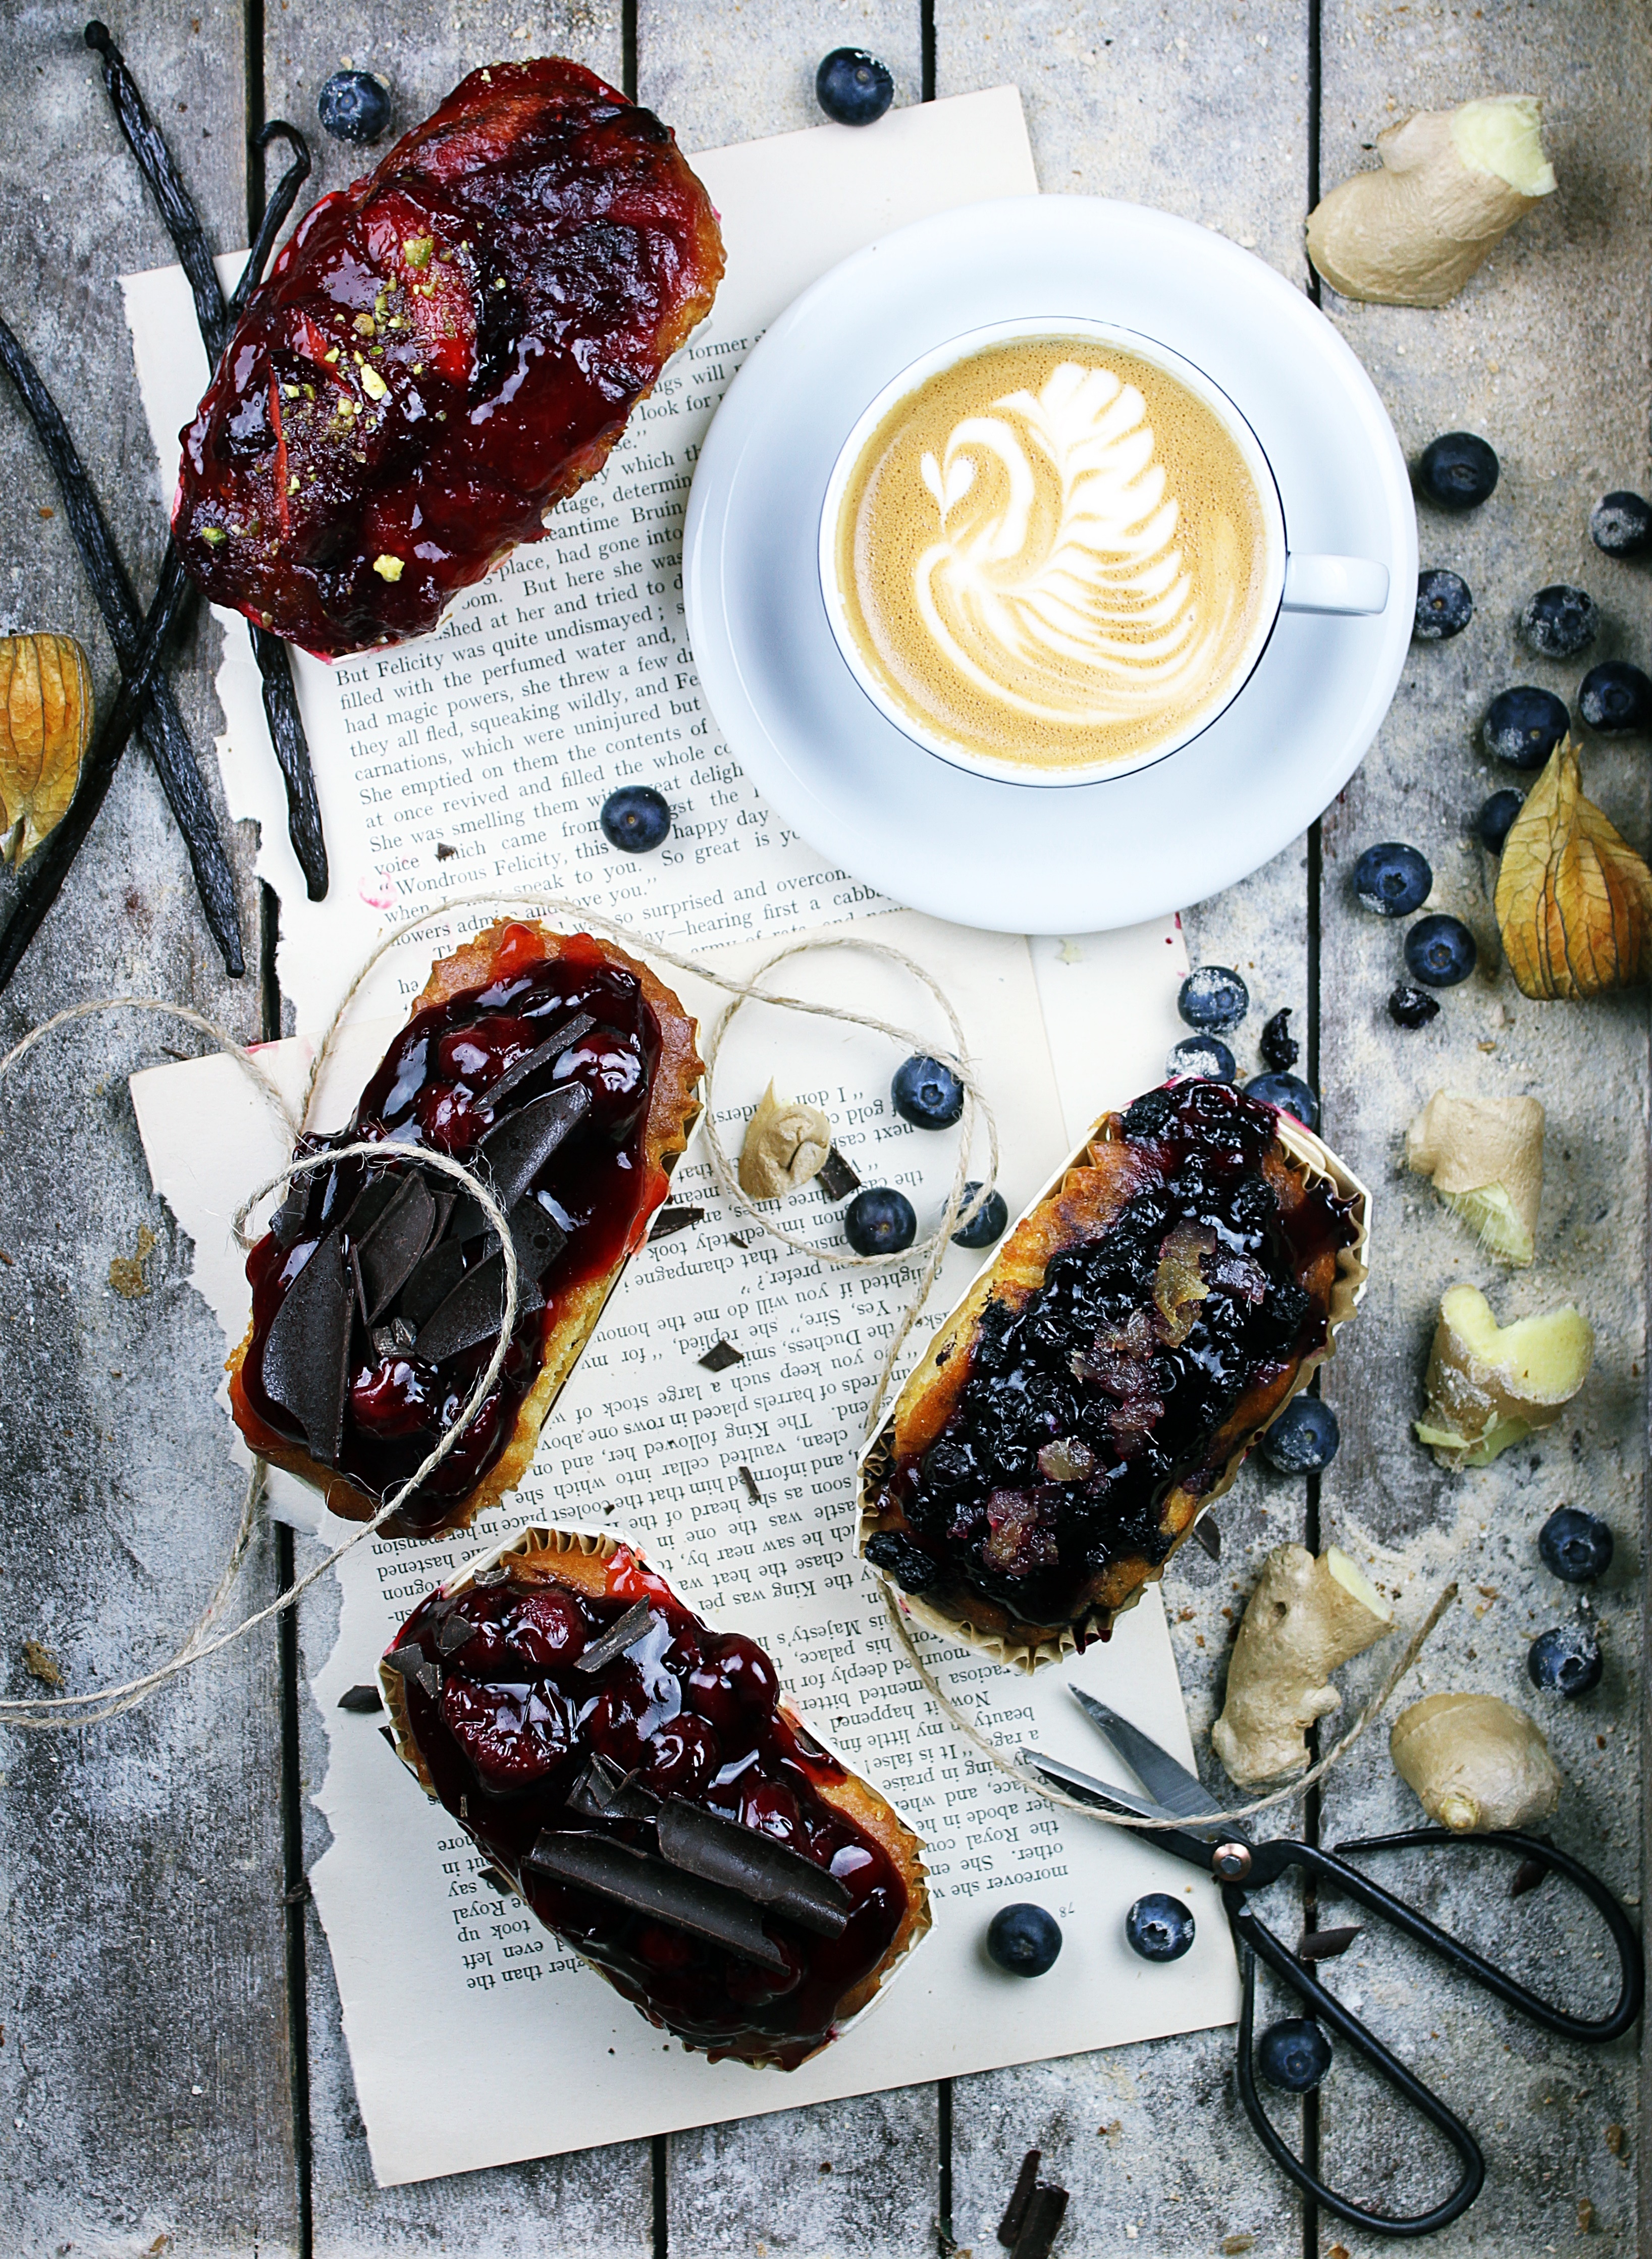 Cherry jam and coffee sandwiches